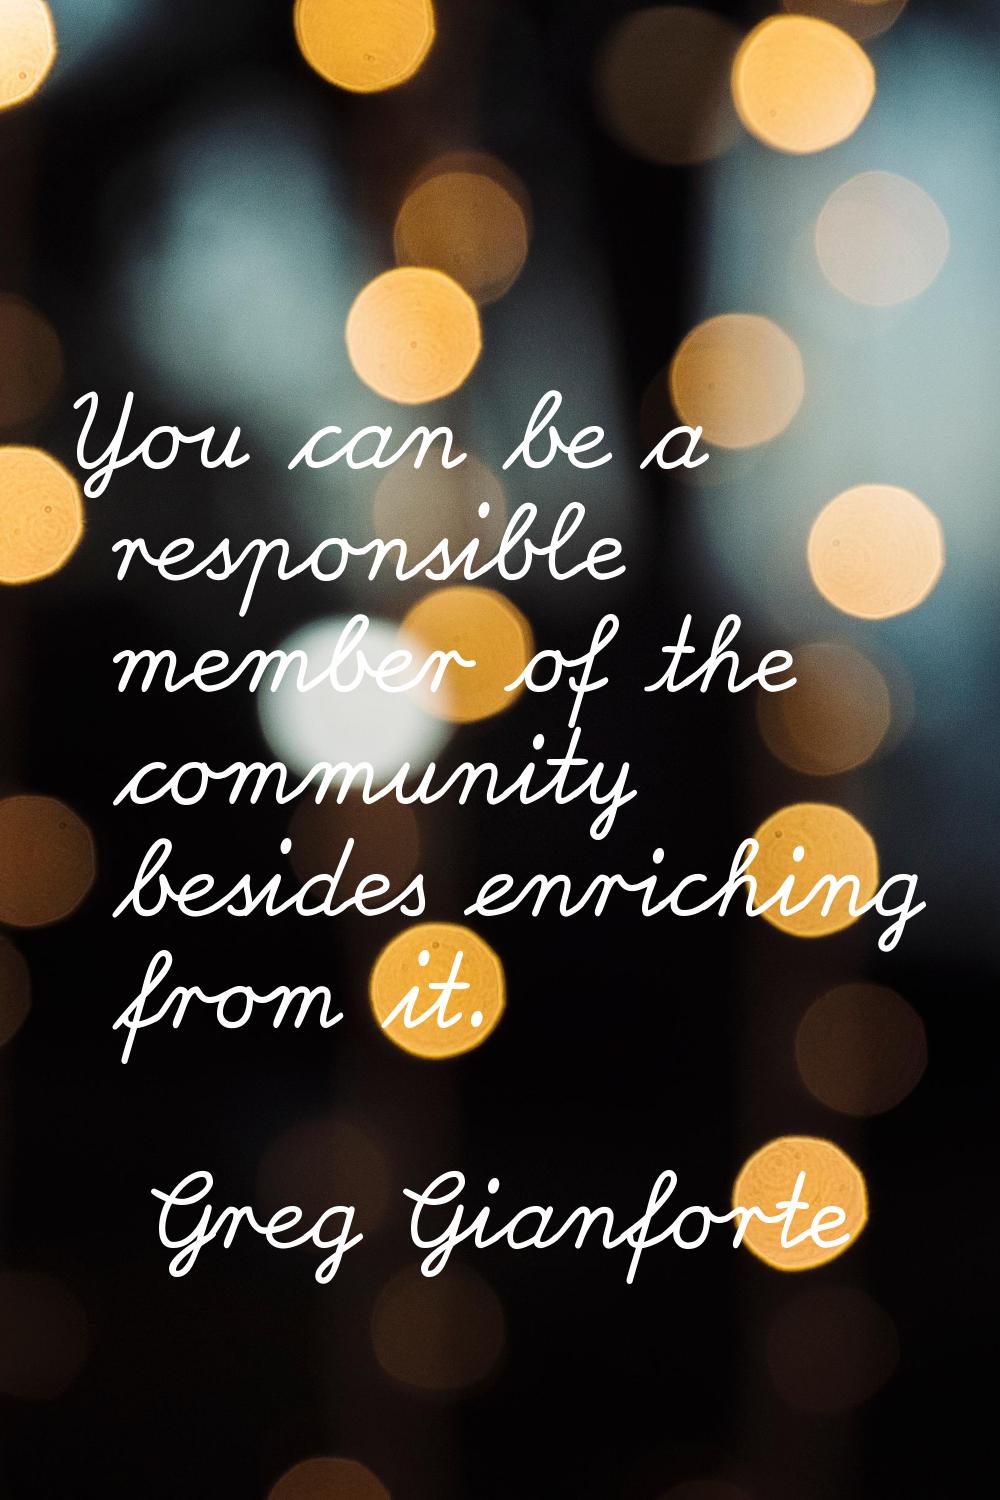 You can be a responsible member of the community besides enriching from it.